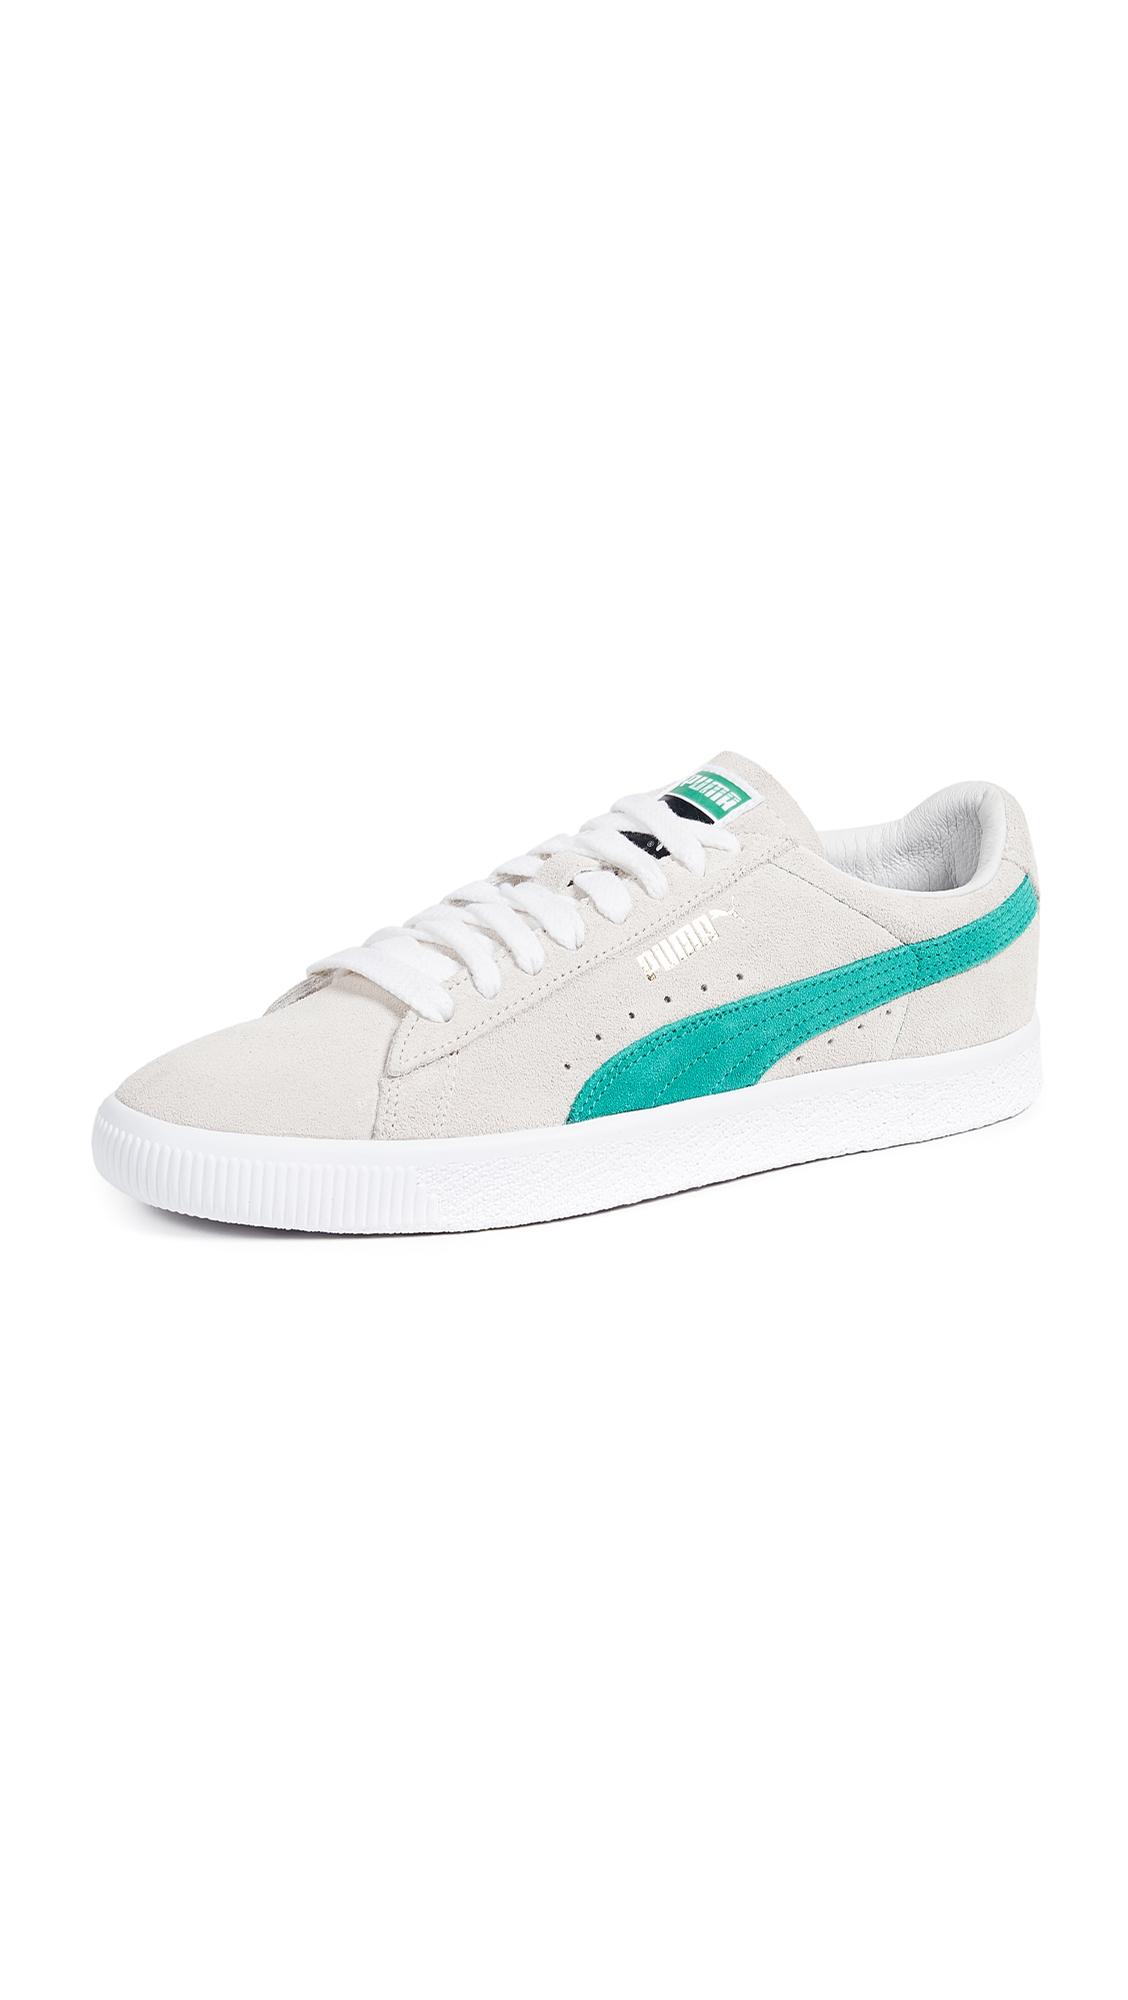 green and white suede pumas